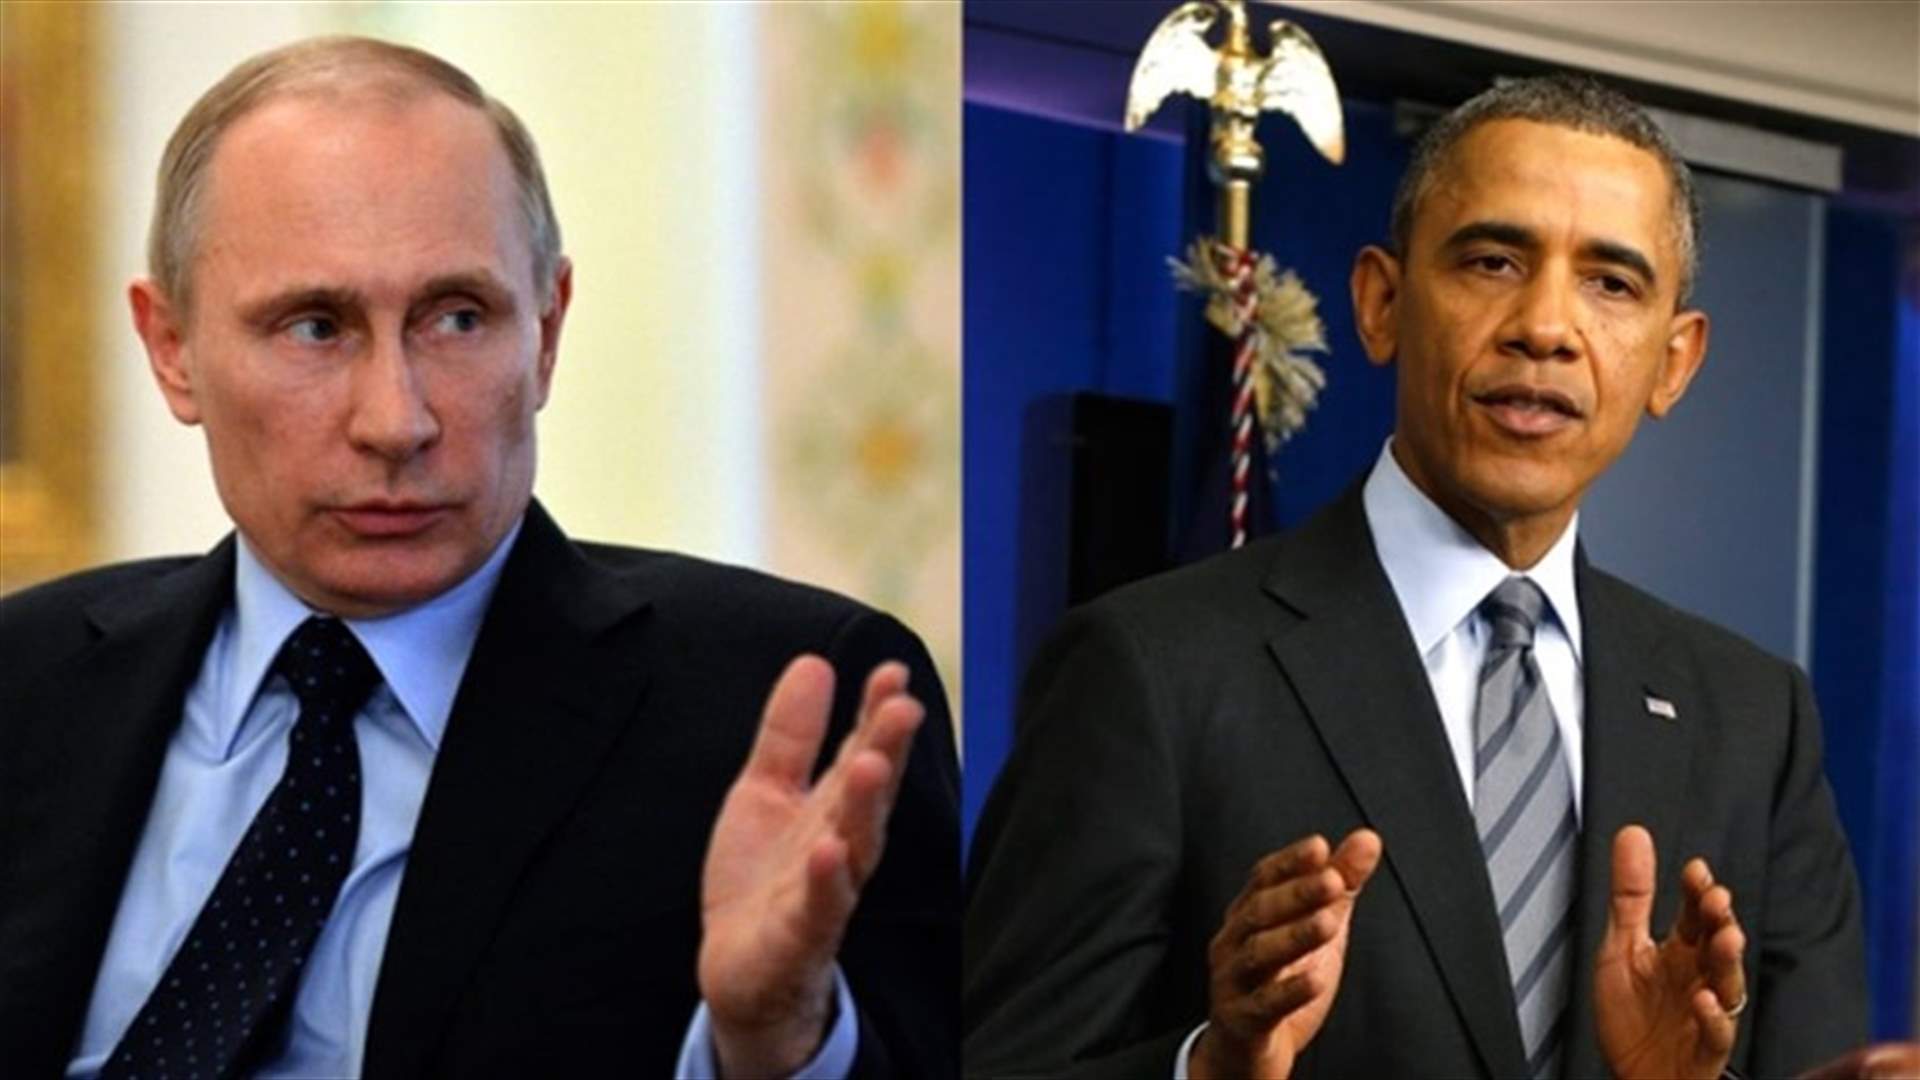 Putin, Obama agree on cooperation to implement Syria agreement